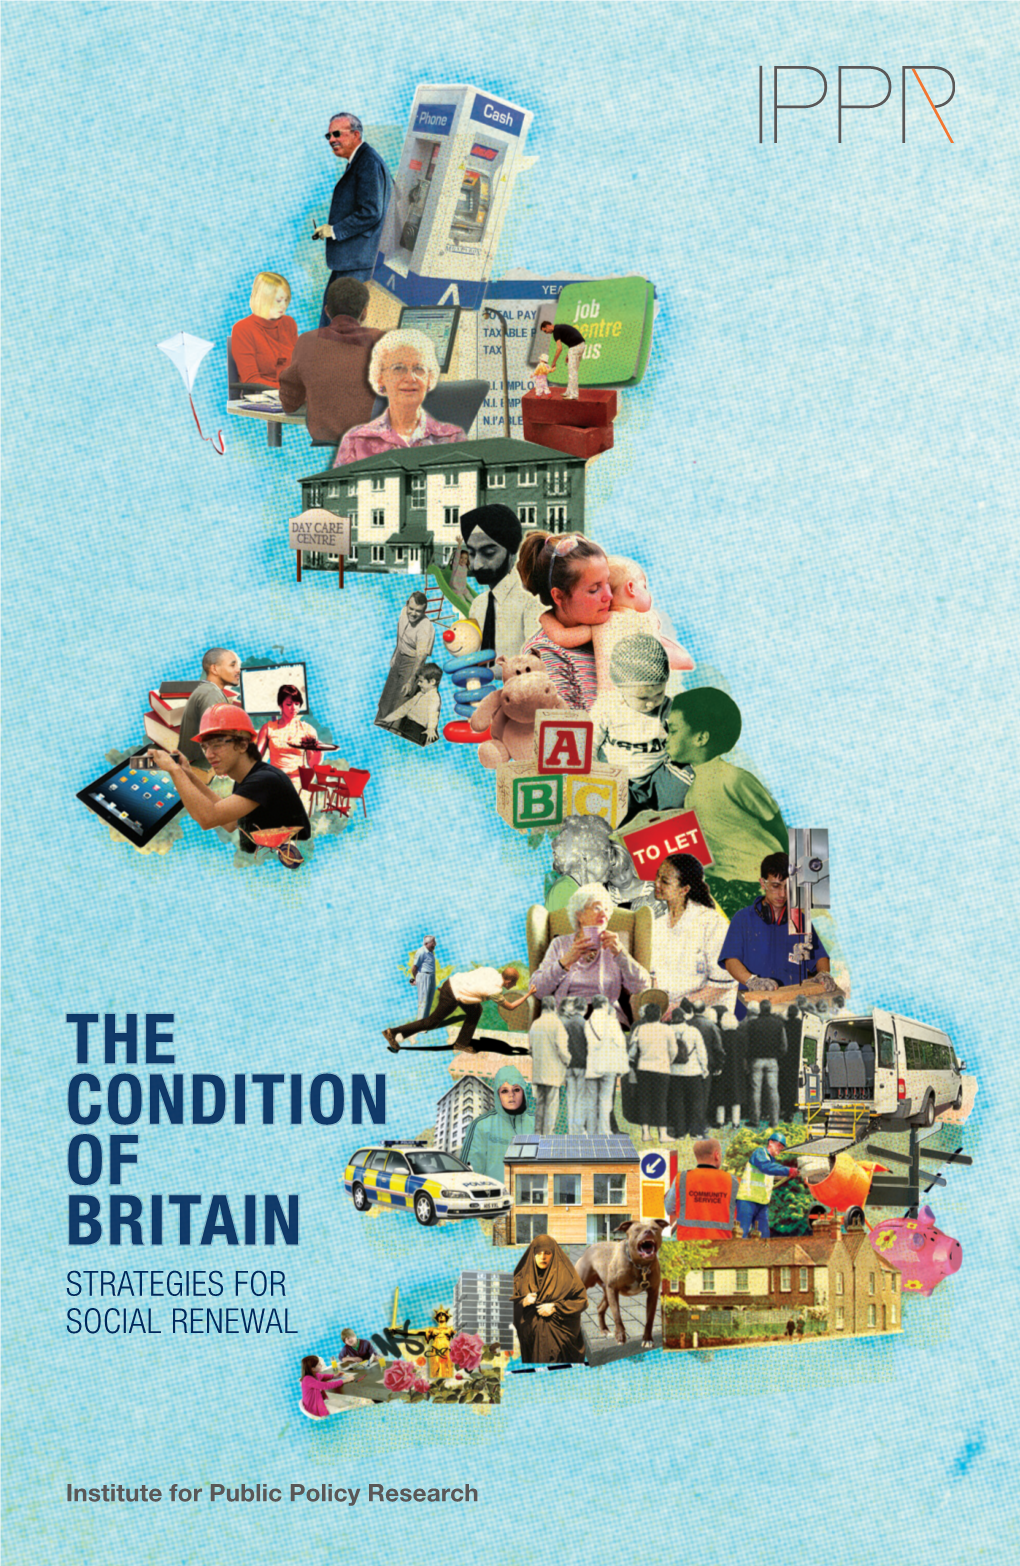 The Condition of Britain Strategies for Social Renewal